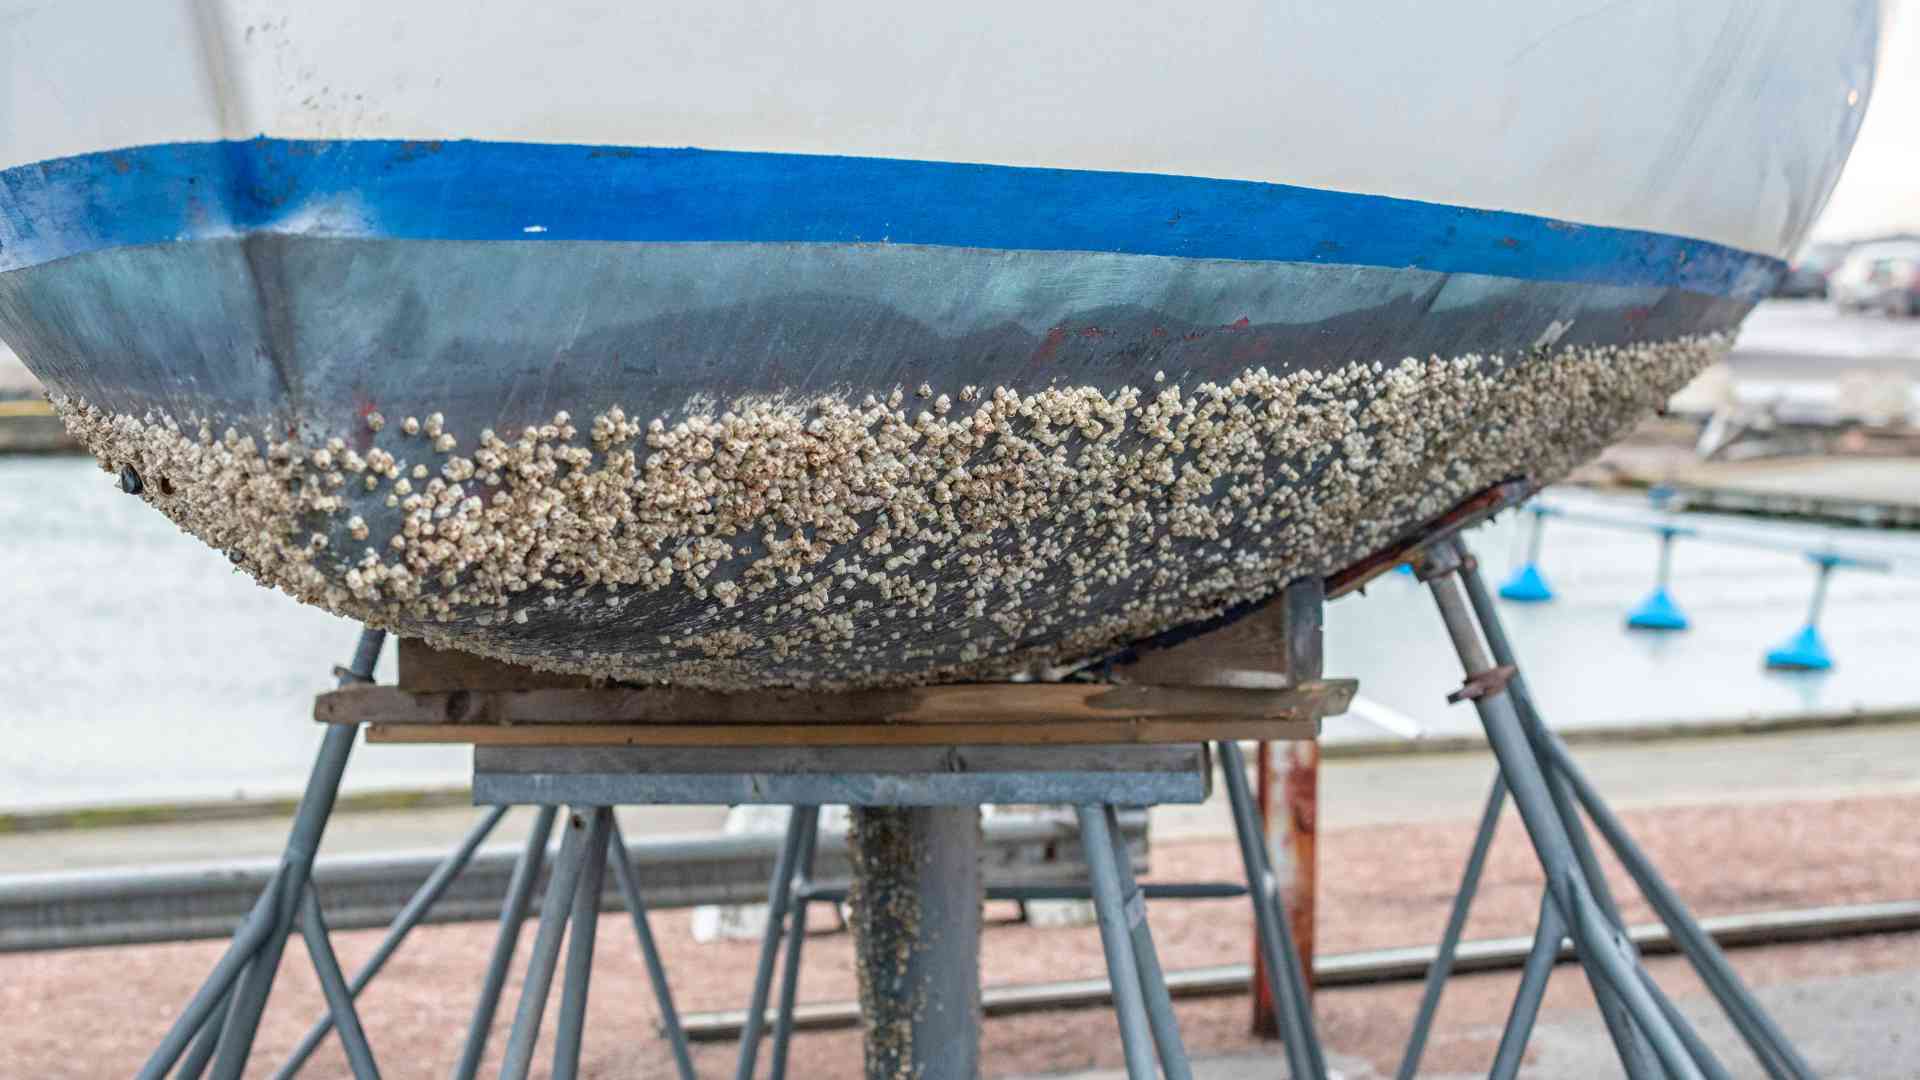 How can I prevent and treat osmotic blistering on a fiberglass boat hull